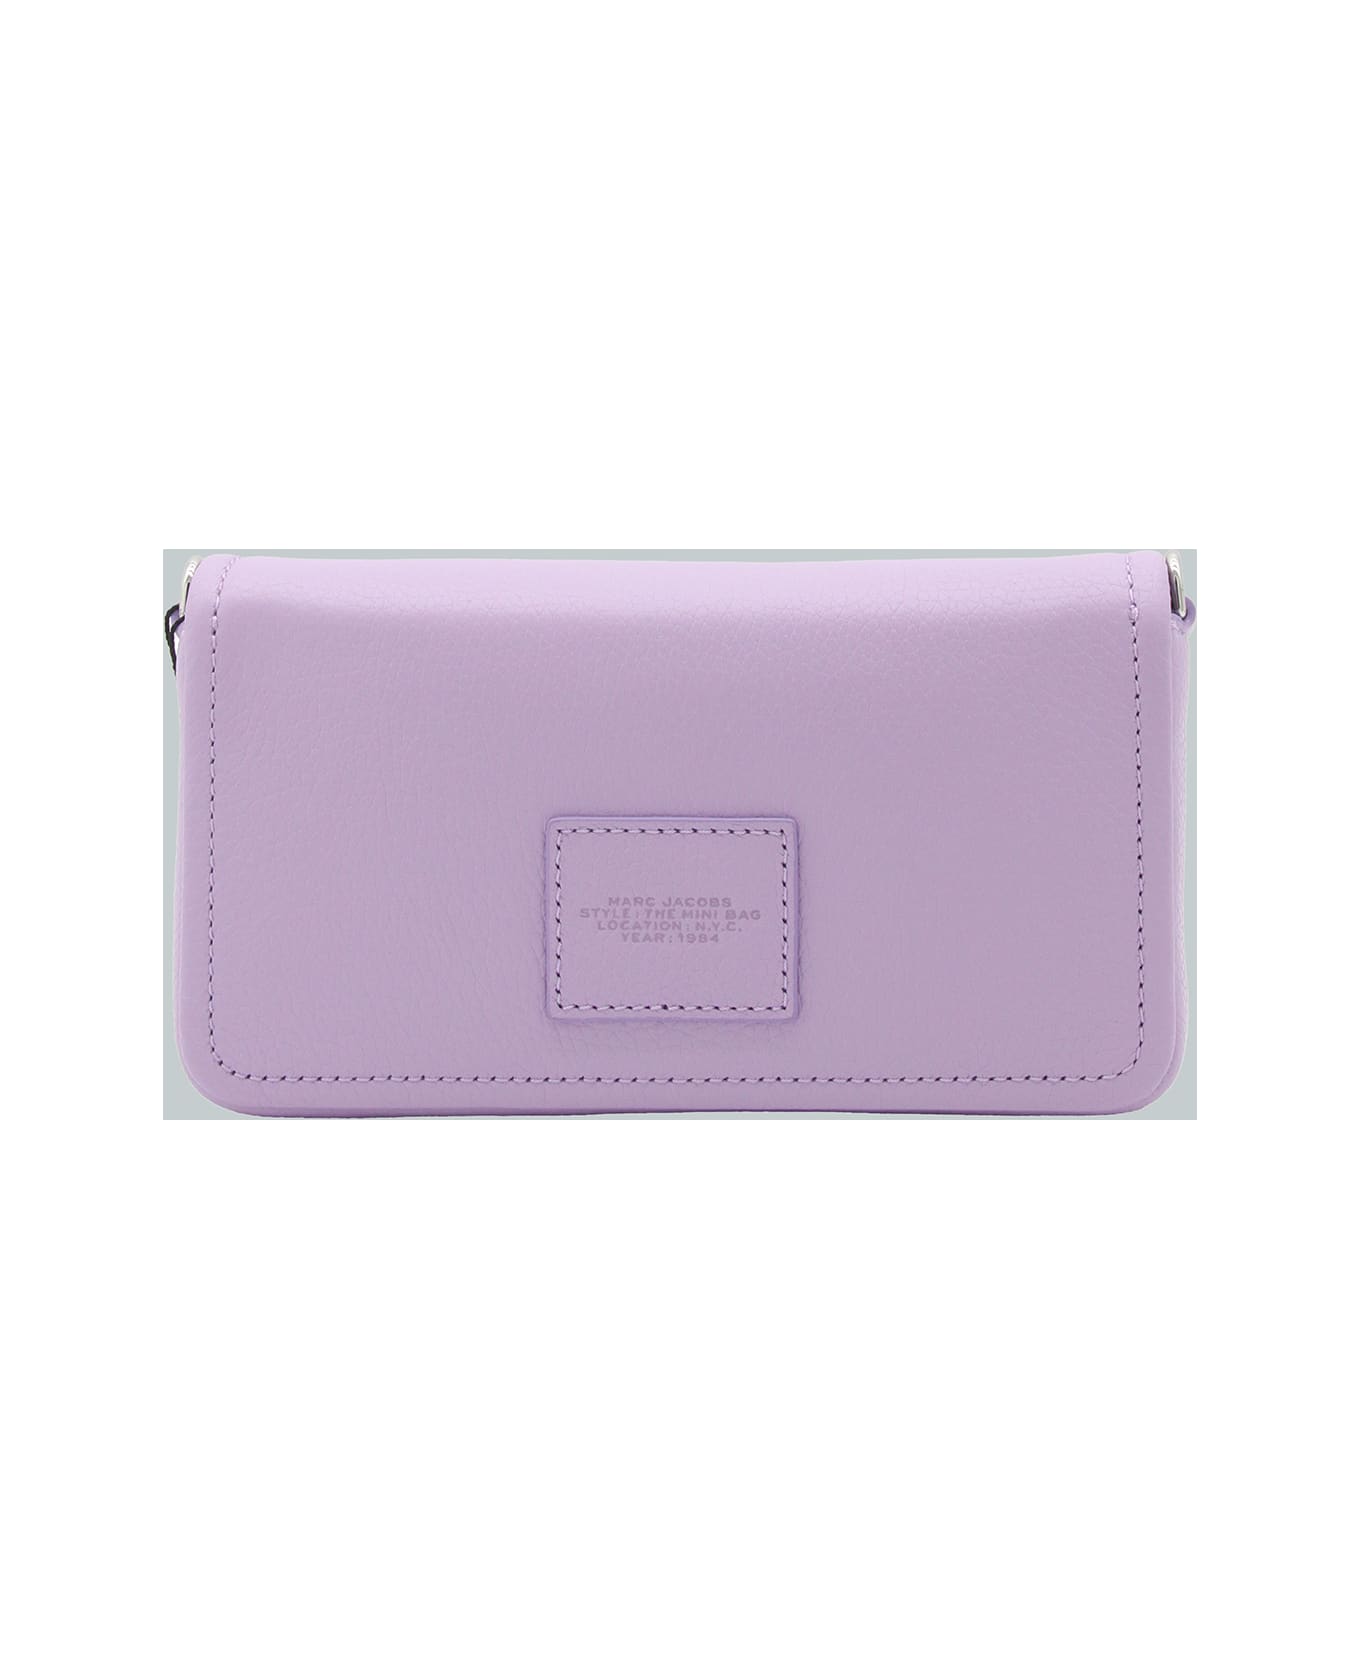 Marc Jacobs Violet Leather The Leather Mini Bag - WISTERIA